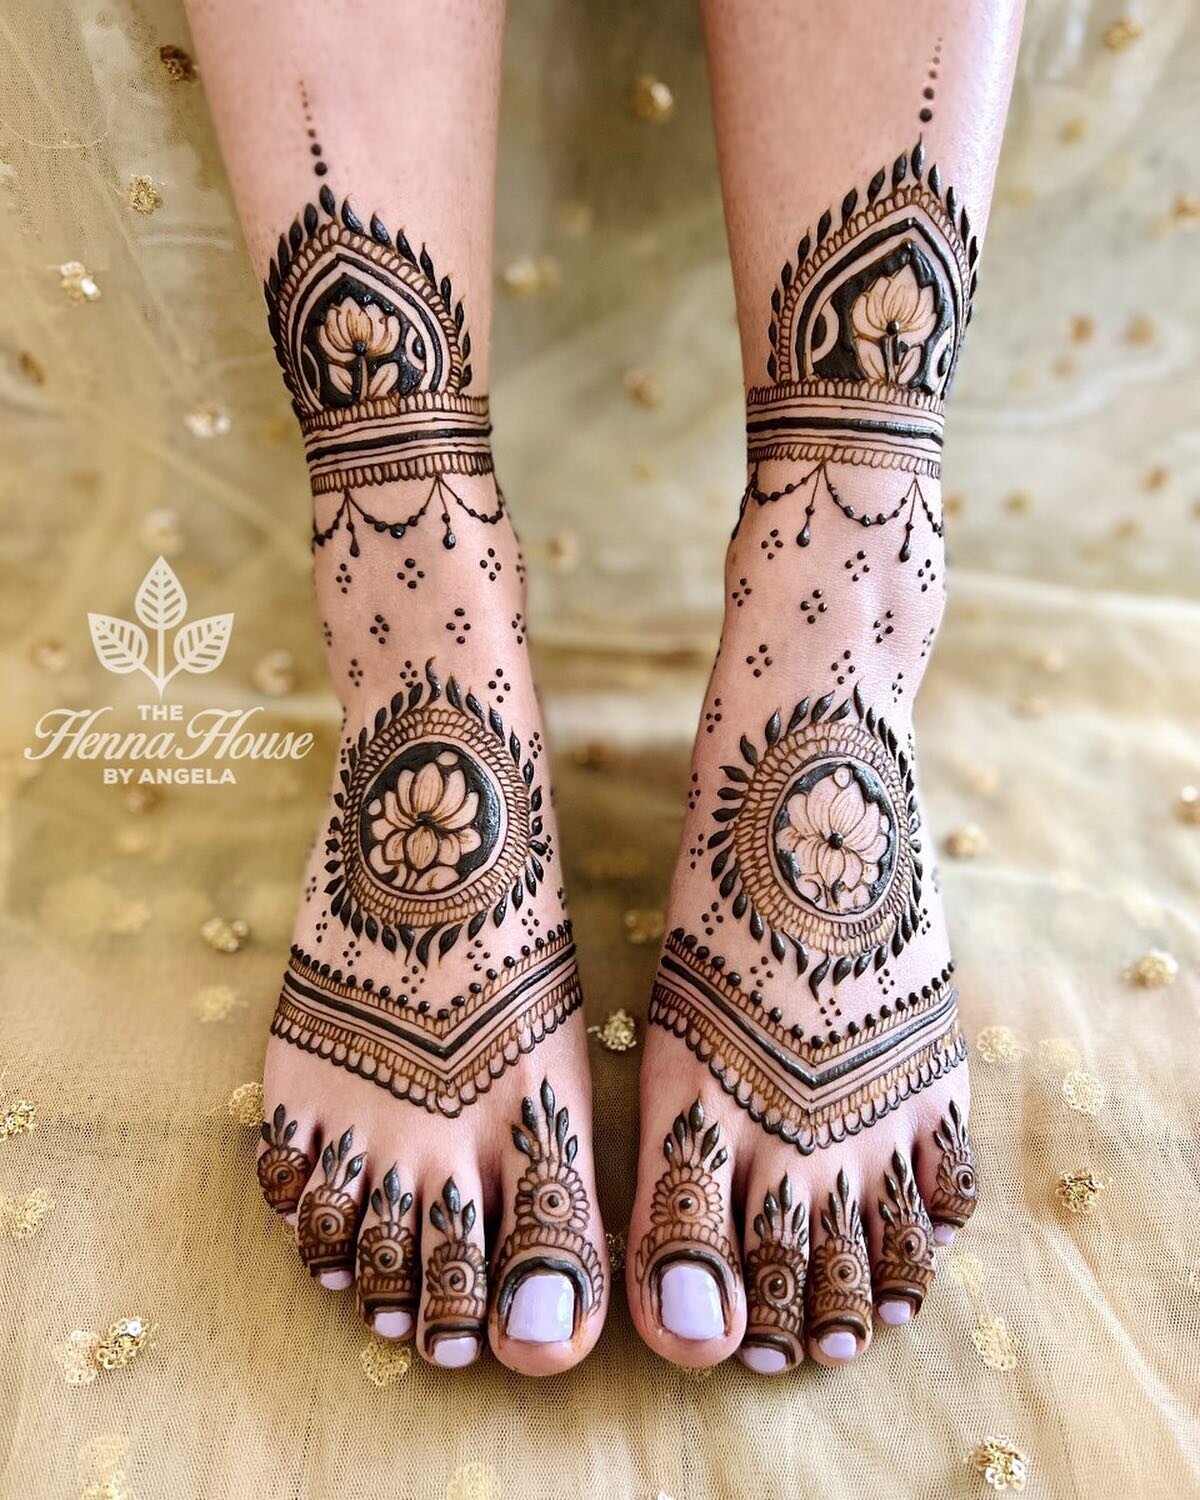 Simi&rsquo;s bridal feet were perfection in my eyes 🤩💛 You can go wrong with this amount!